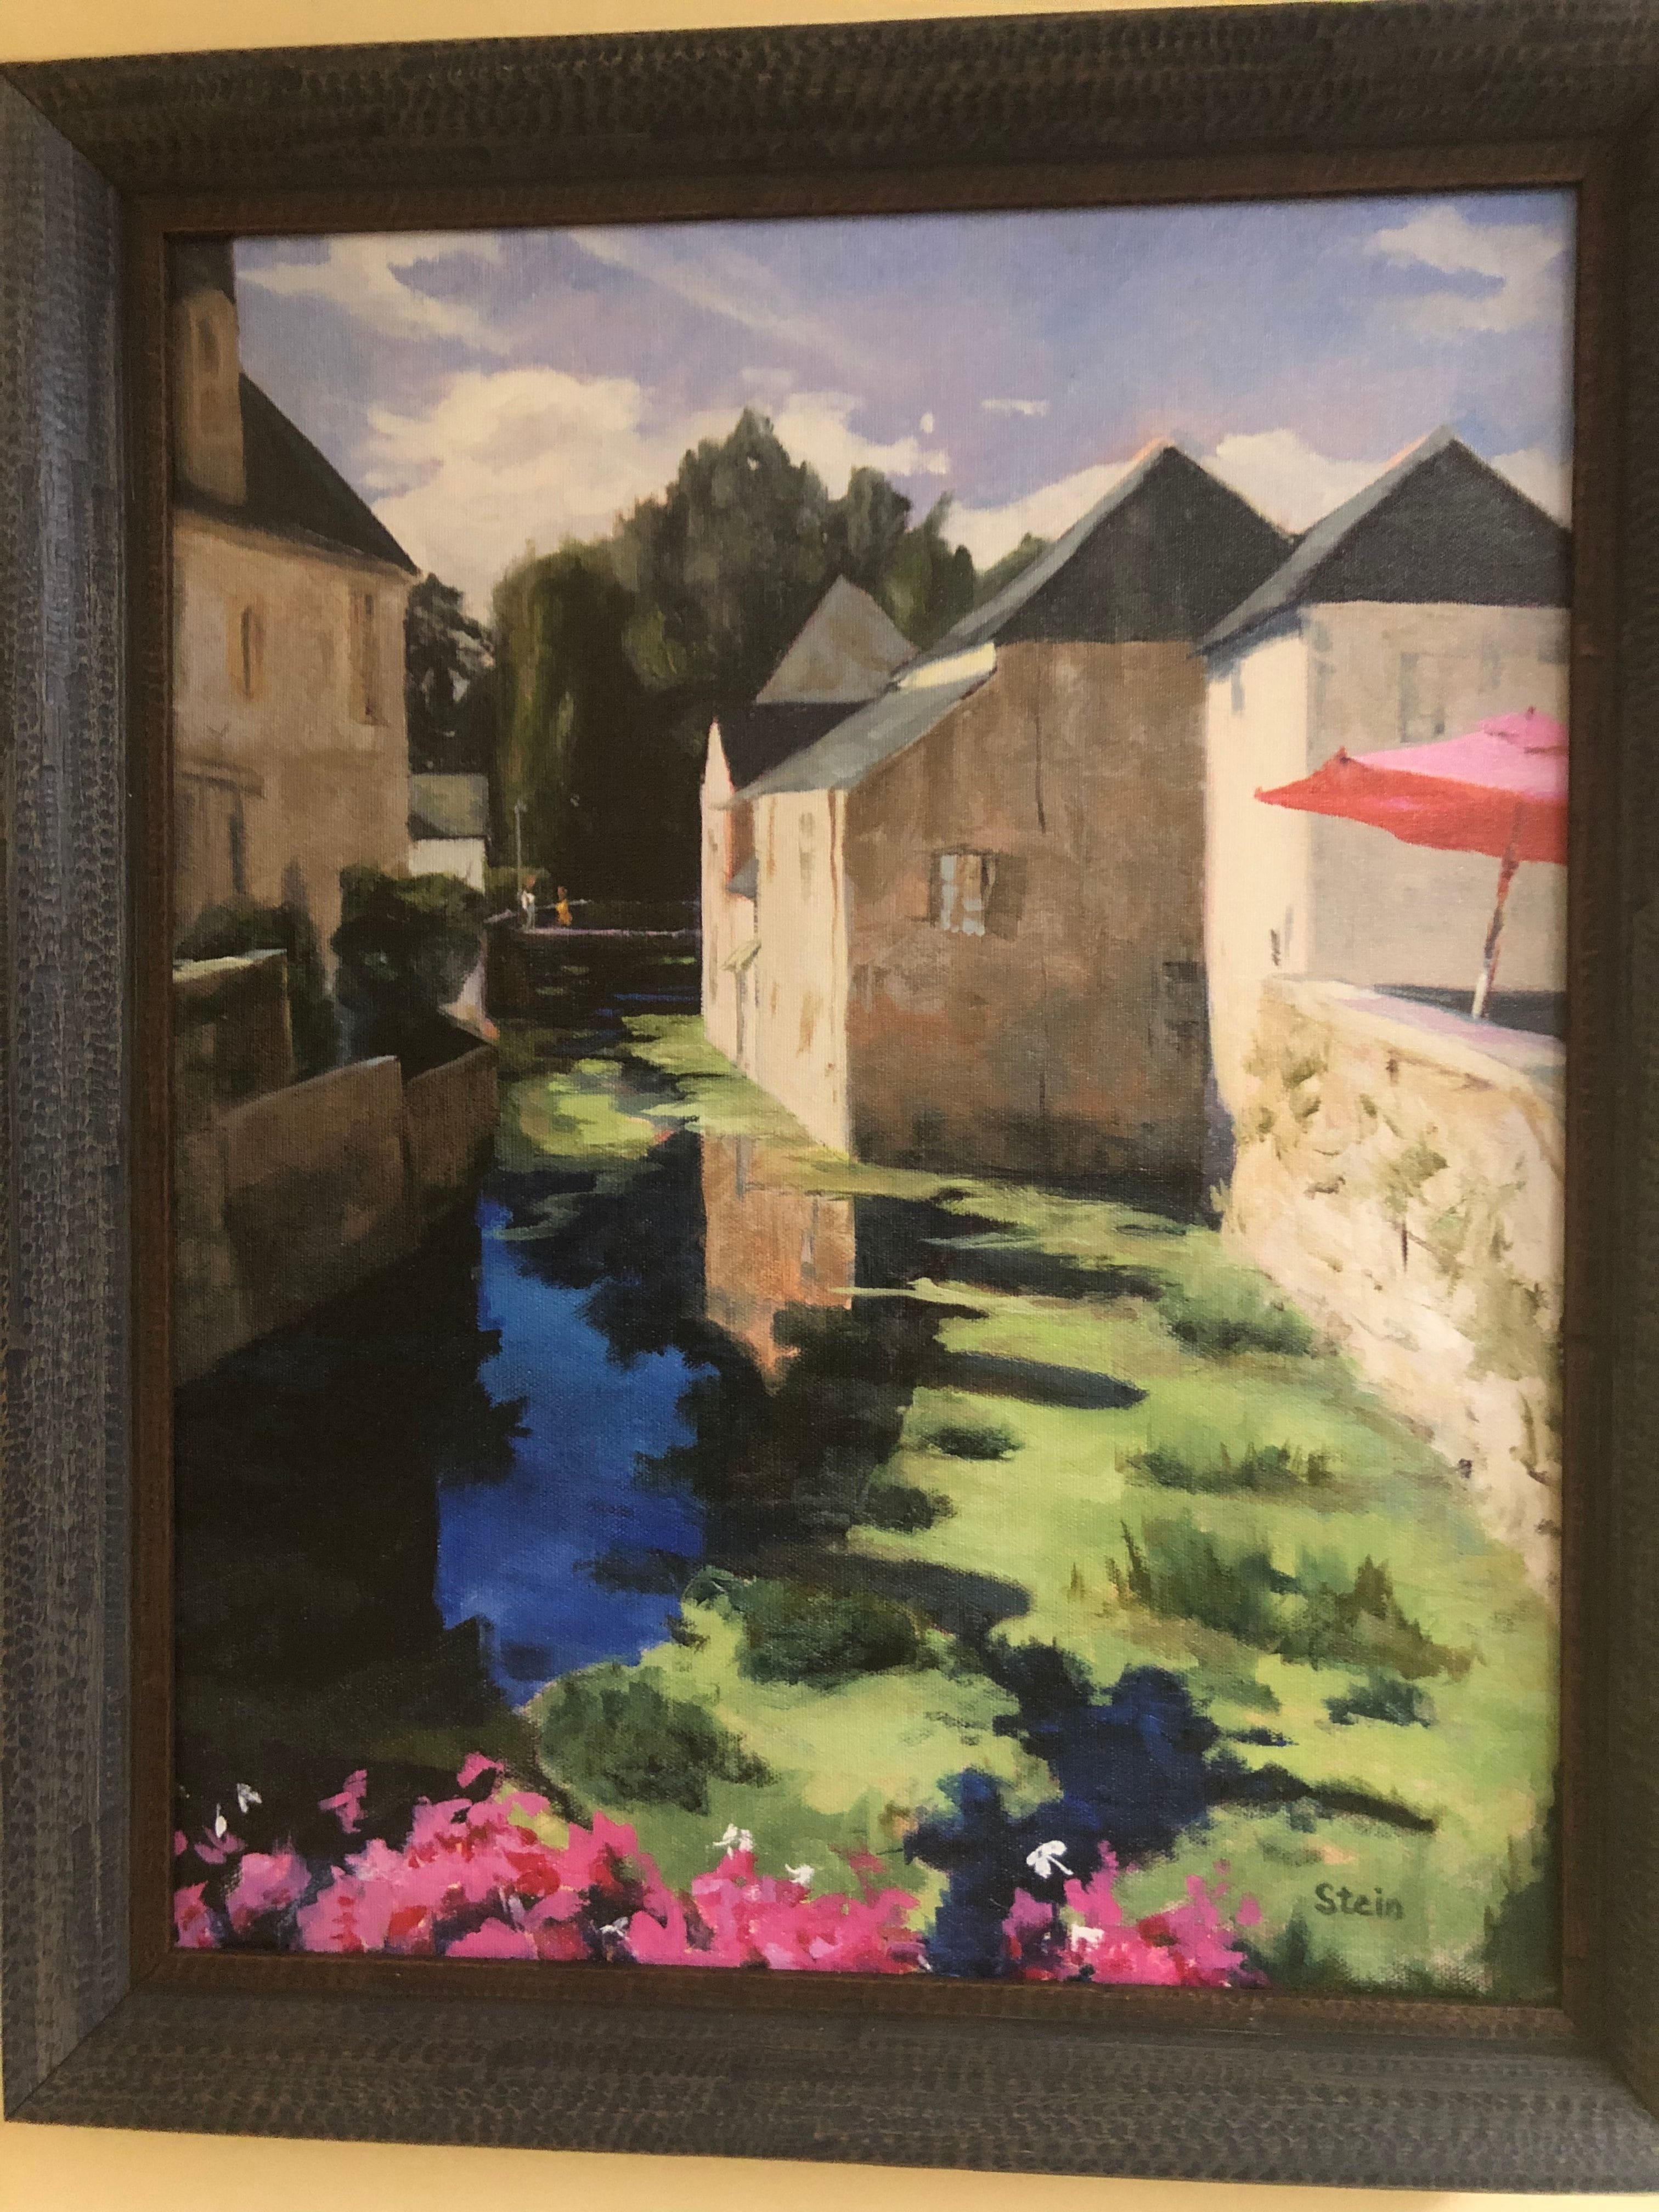 Buildings And River Painting In A Picture Frame